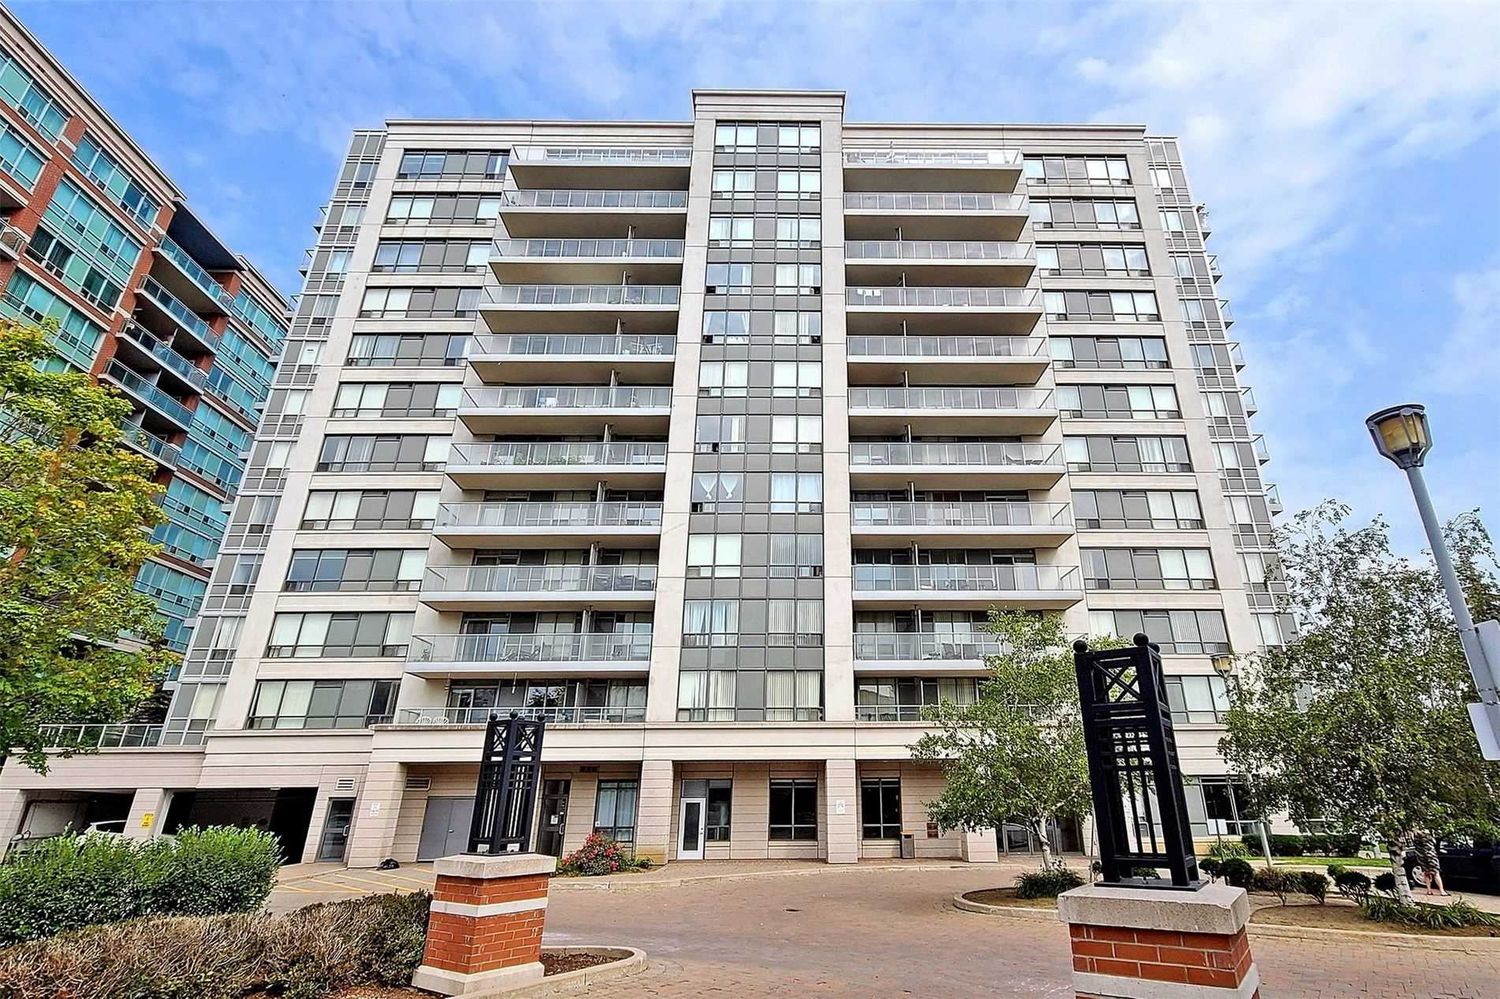 68-88 Times Avenue. Victoria Tower Condos is located in  Markham, Toronto - image #2 of 2